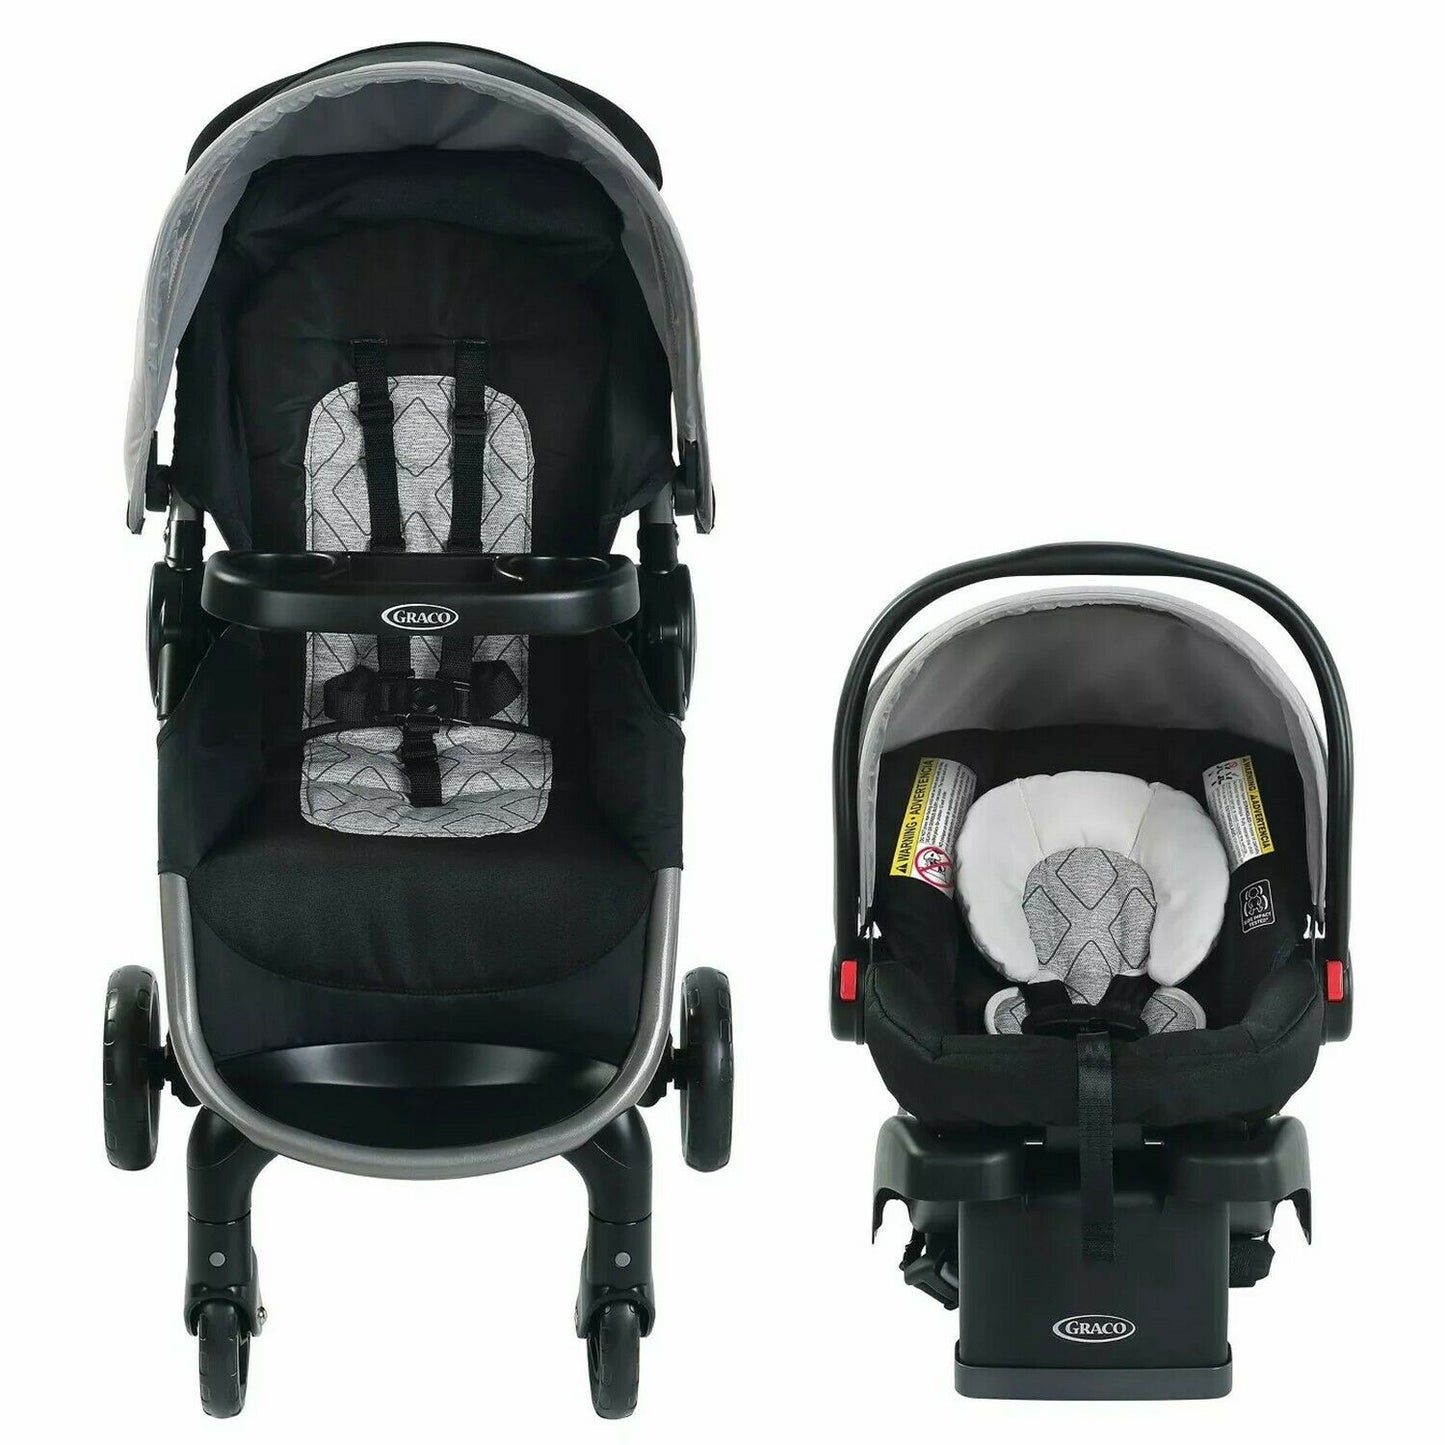 Stroller Baby Travel System with Car Seat Combo High Chair Playard Crib Black